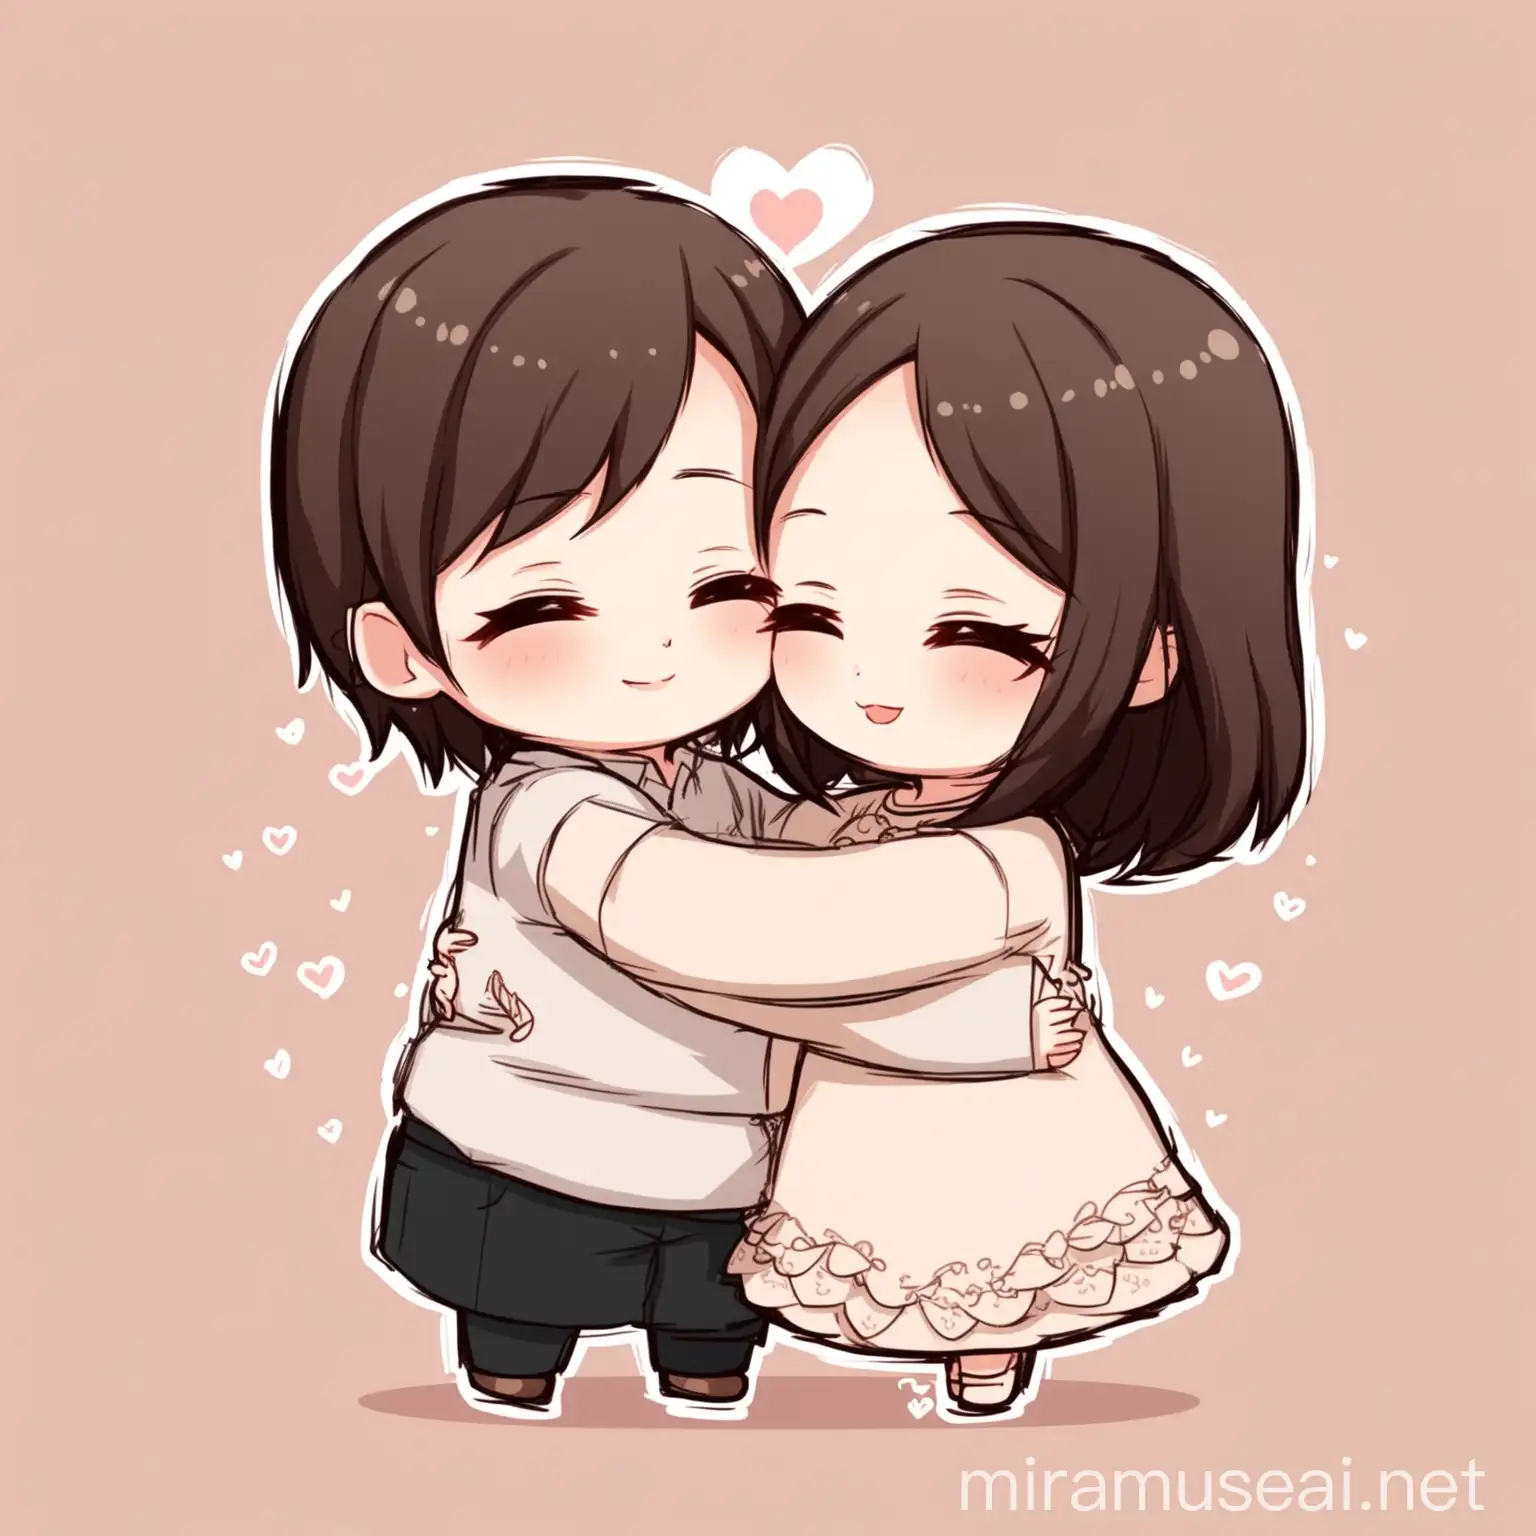 Chibi Couple Embracing in Sweet Kiss and Hug Cute Animated Version